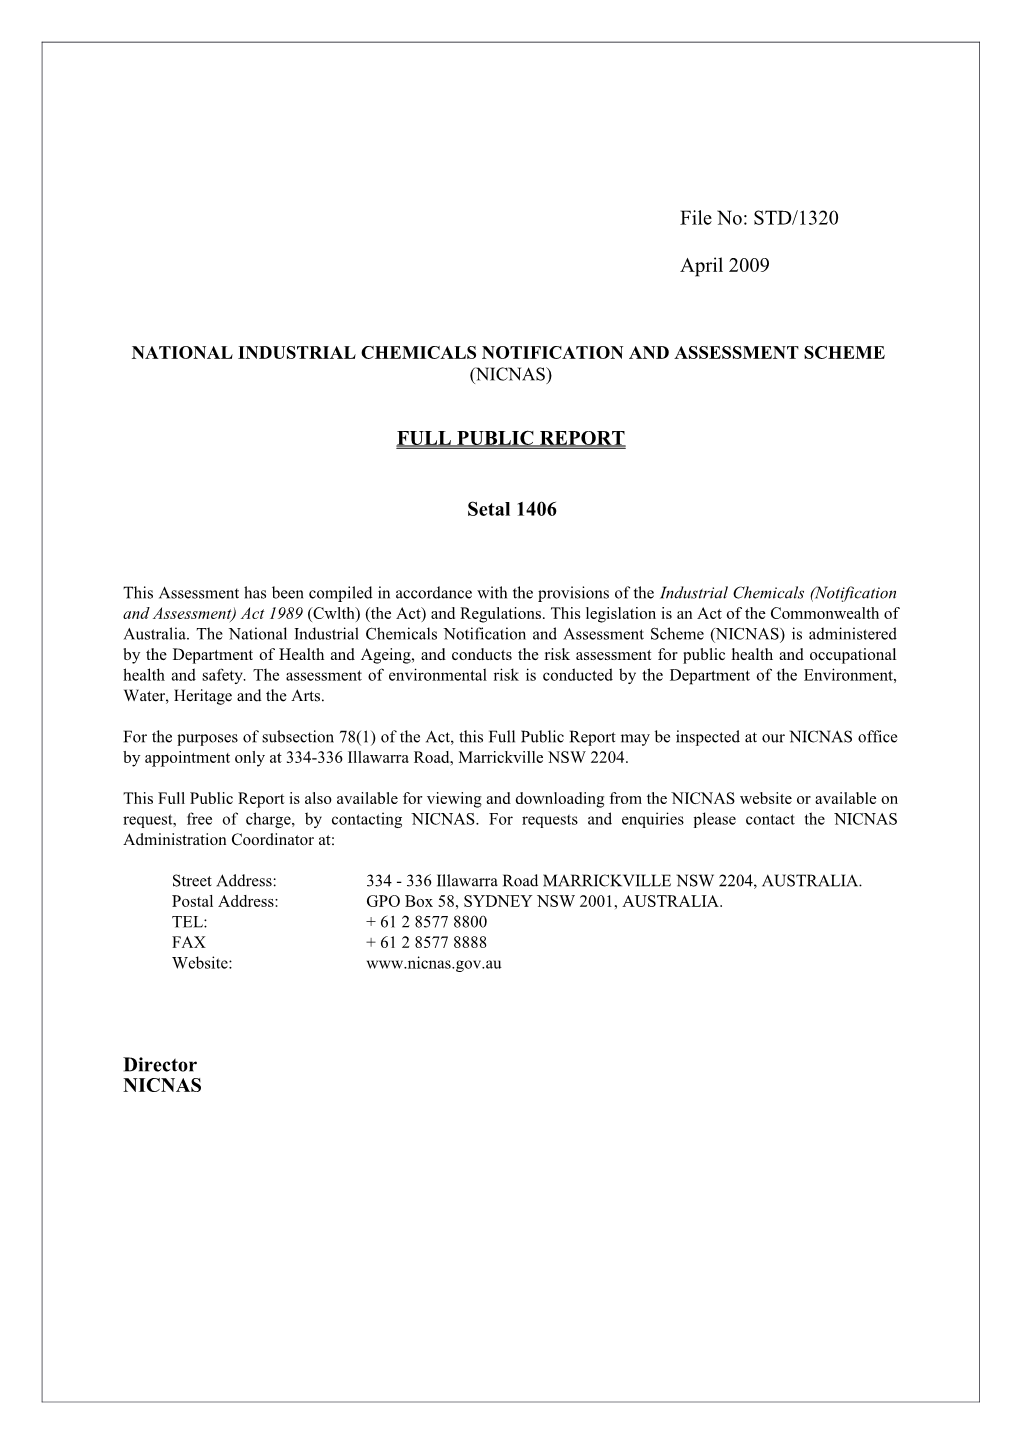 National Industrial Chemicals Notification and Assessment Scheme s27